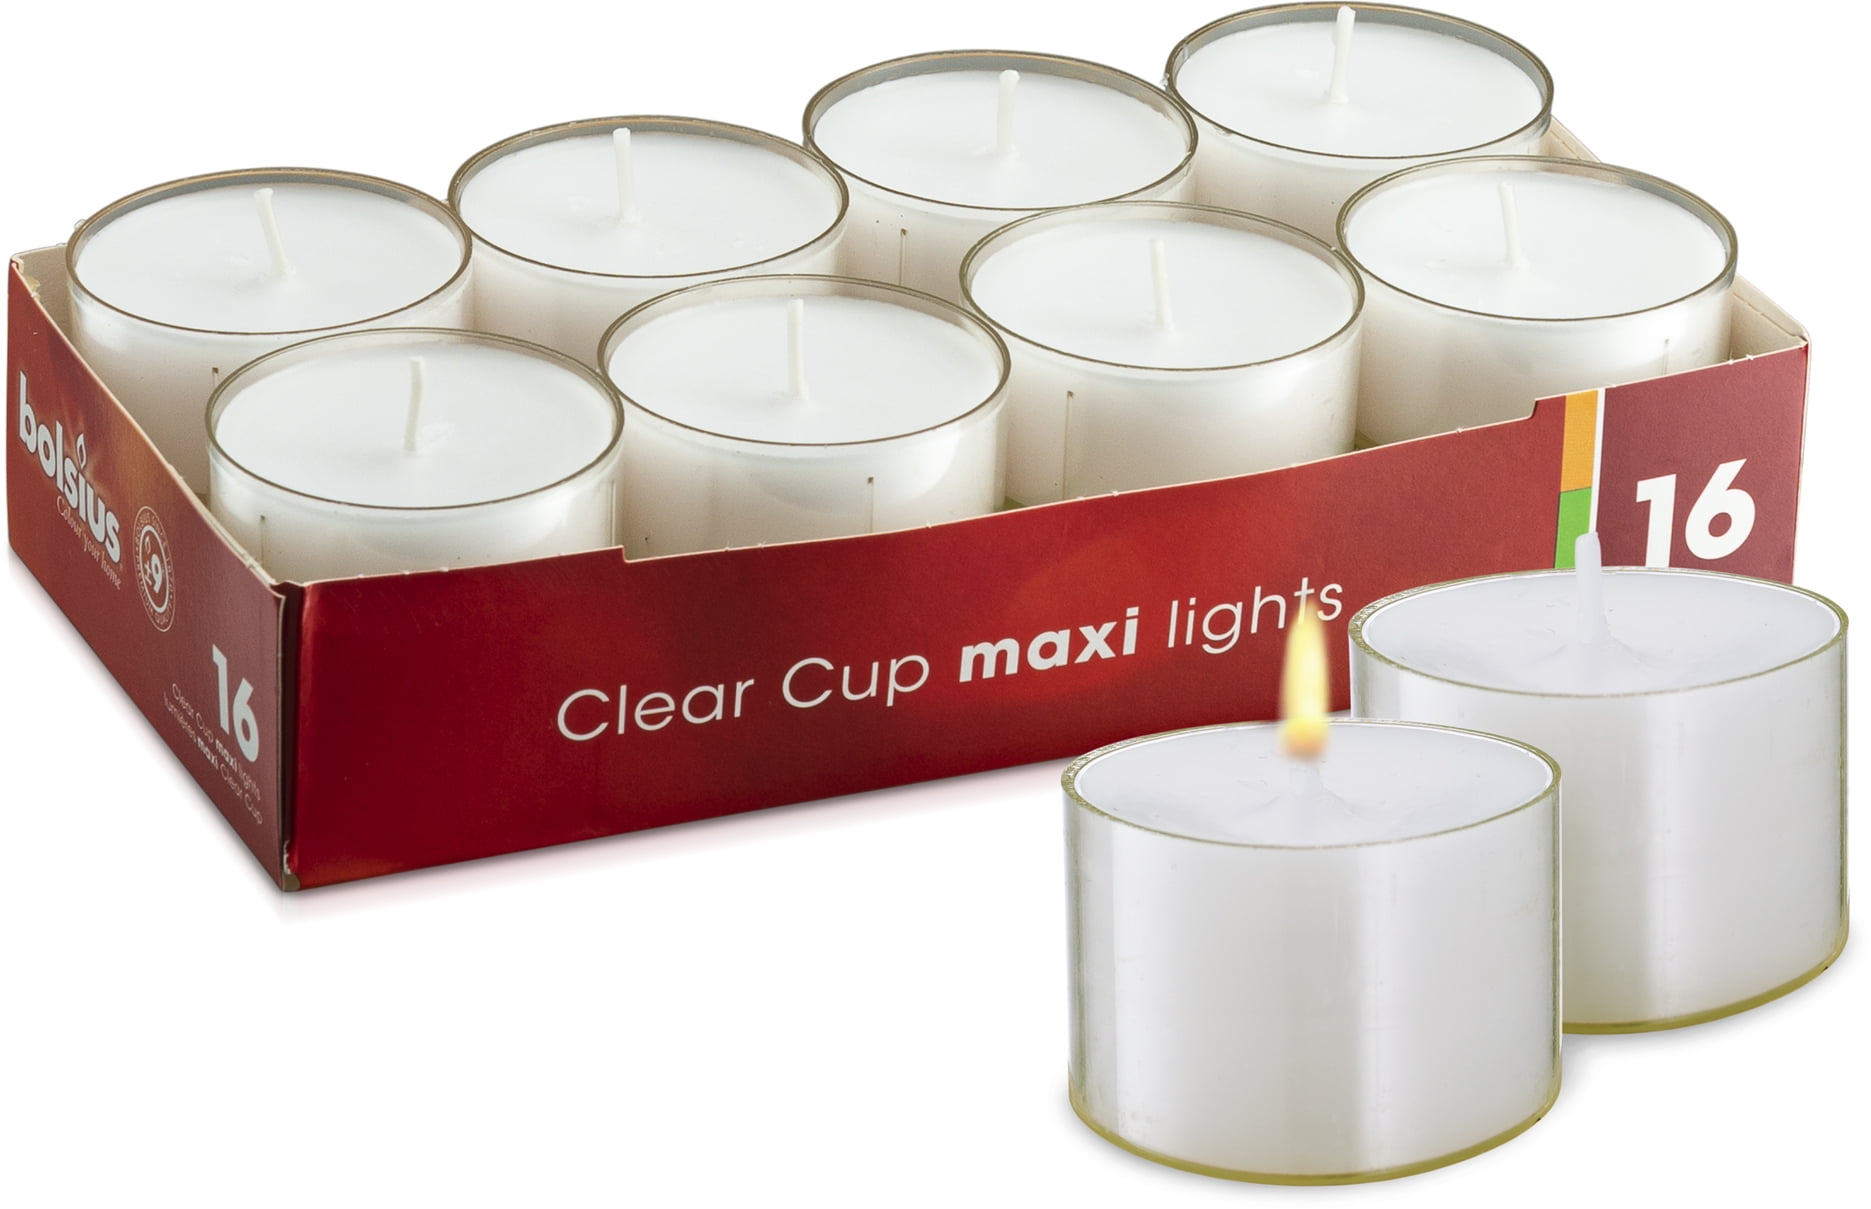 CLEAR CONTAINER VOTIVE CANDLE BURNS 16 HOURS BANQUETS 